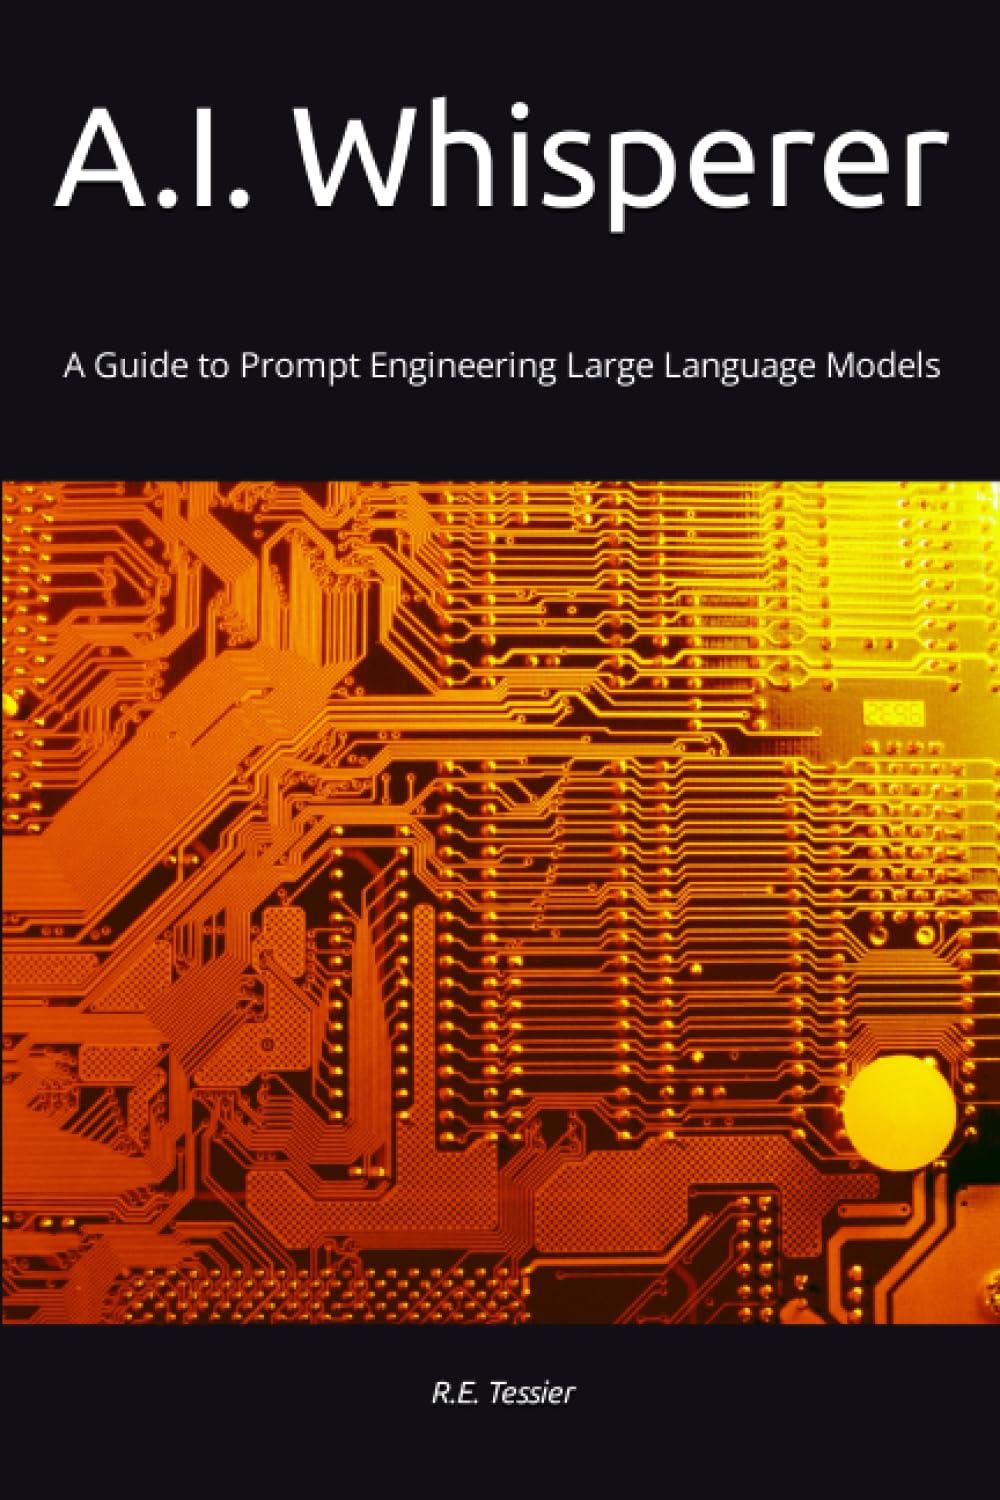 ai whisperer a guide to prompt engineering large language models 1st edition r.e. tessier b0chl7mbhr,